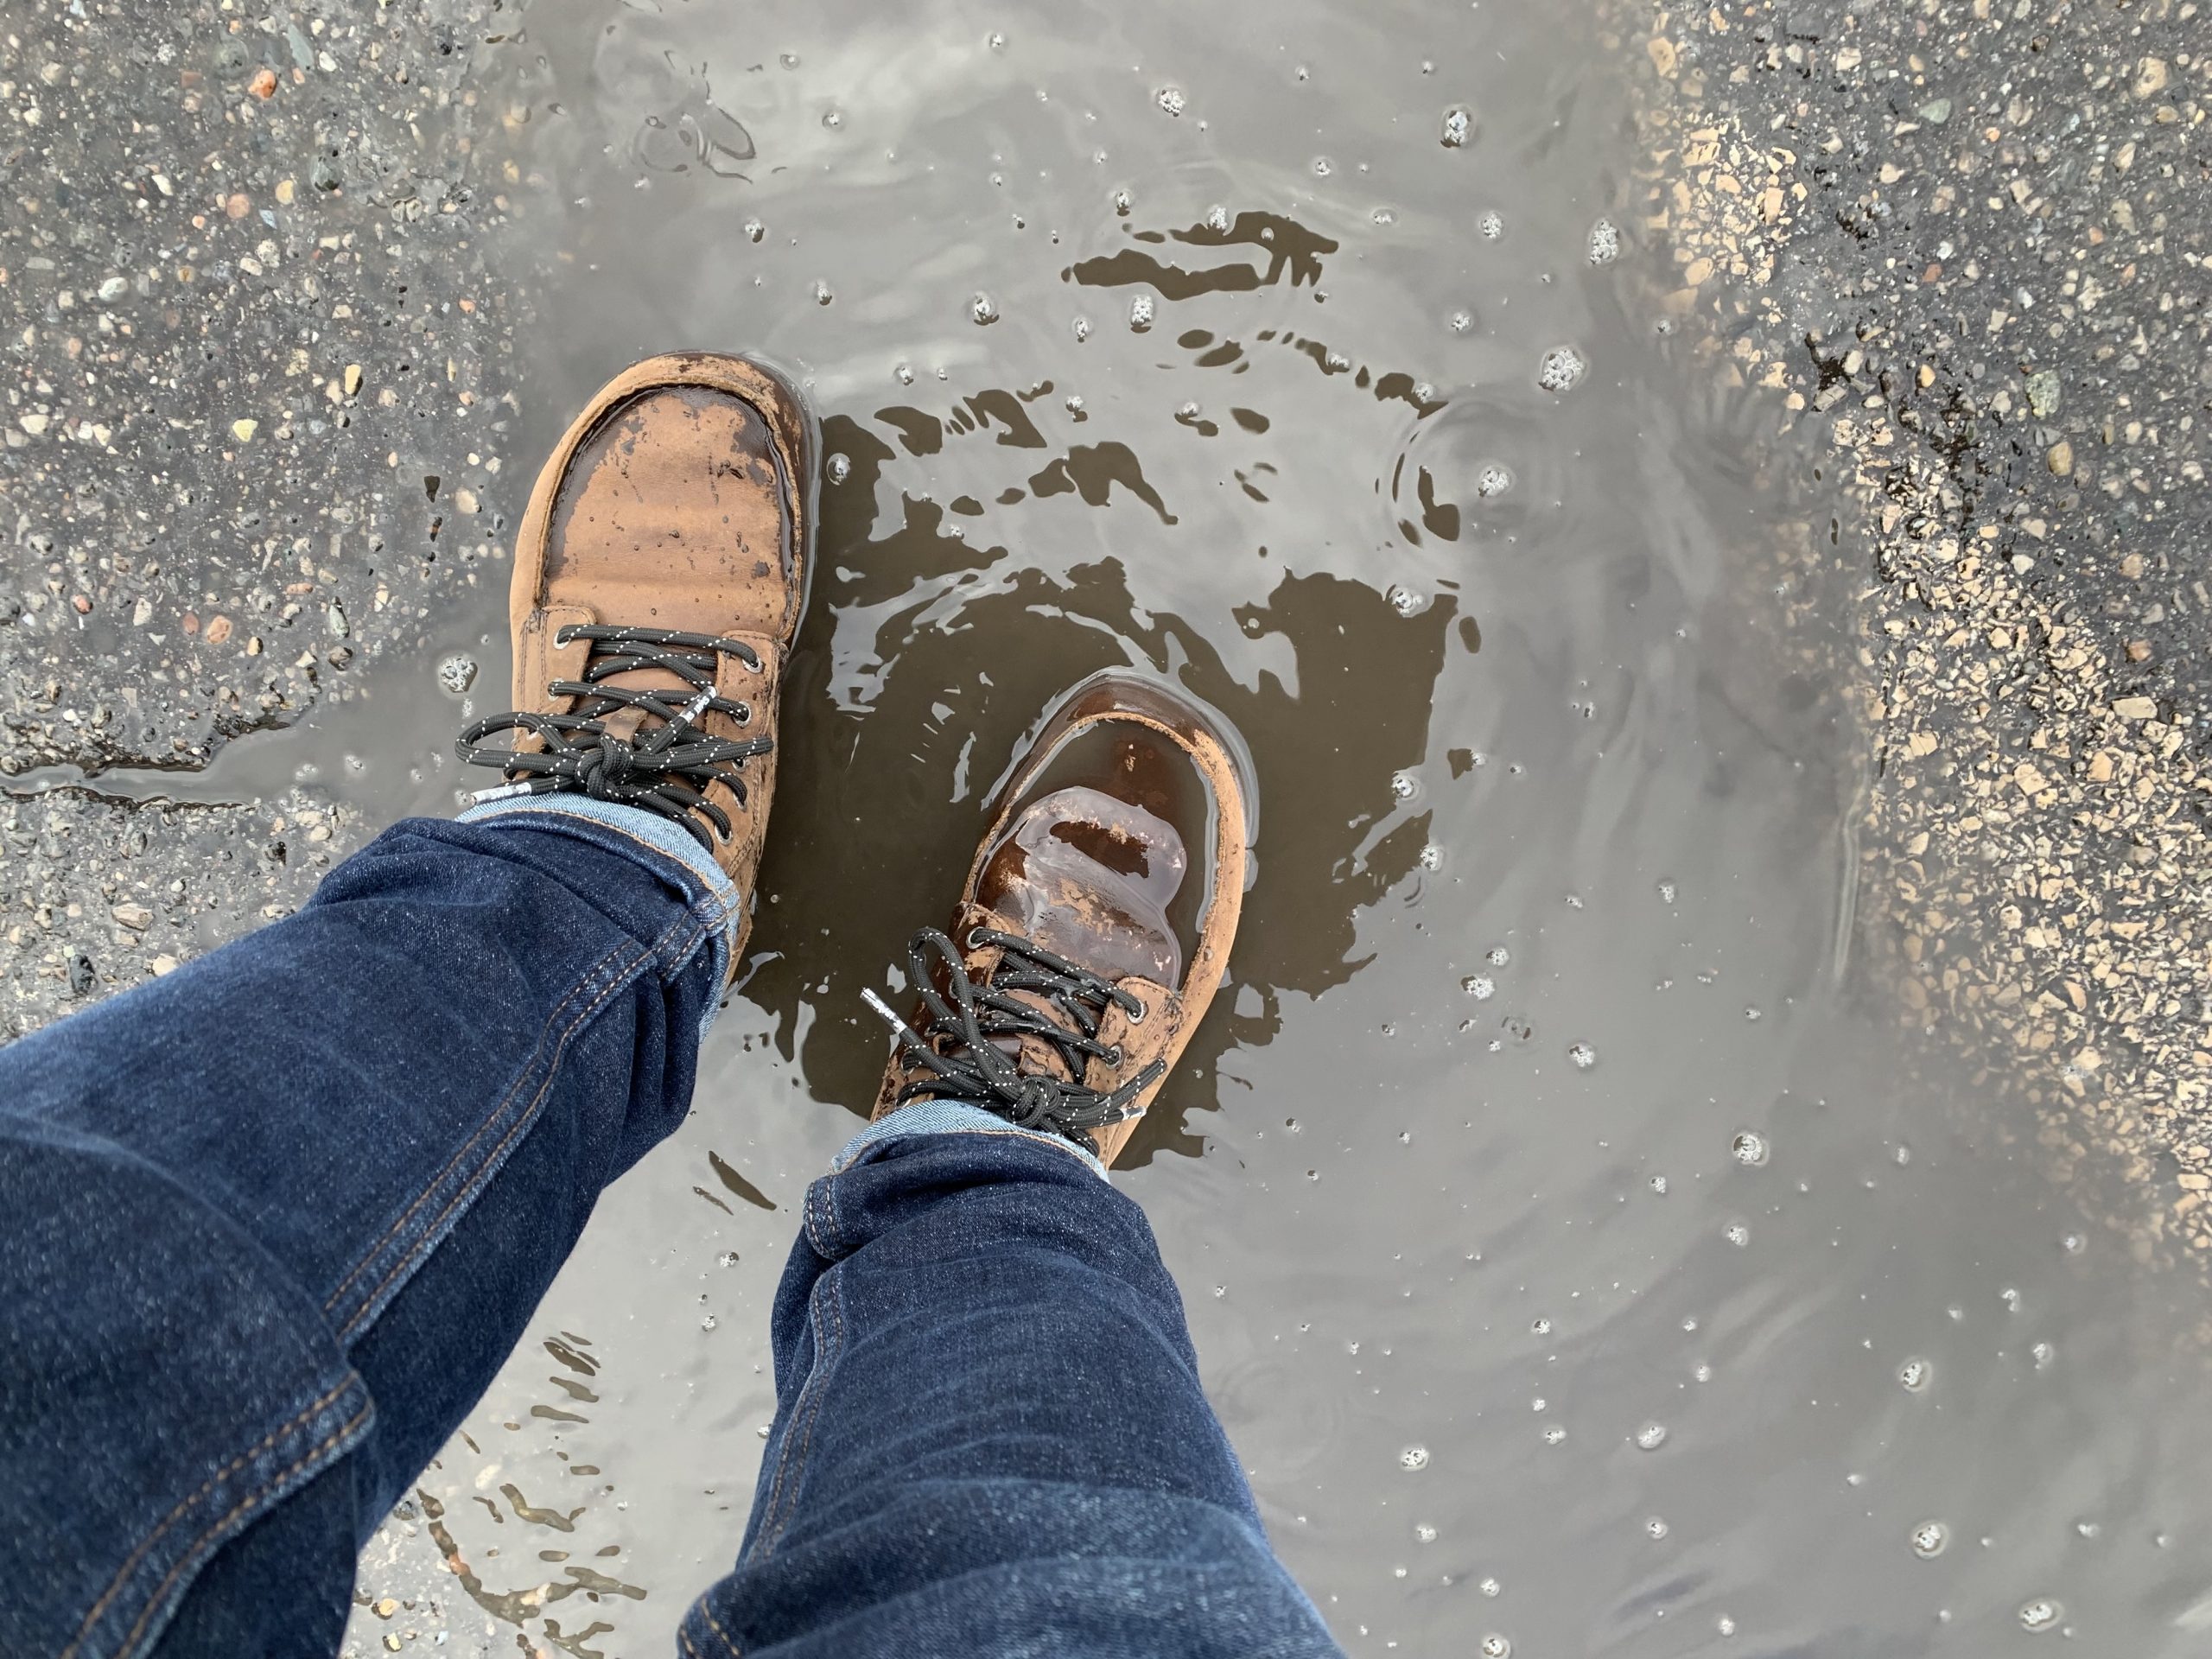 Lems Waterproof Boulder Boots In A Puddle